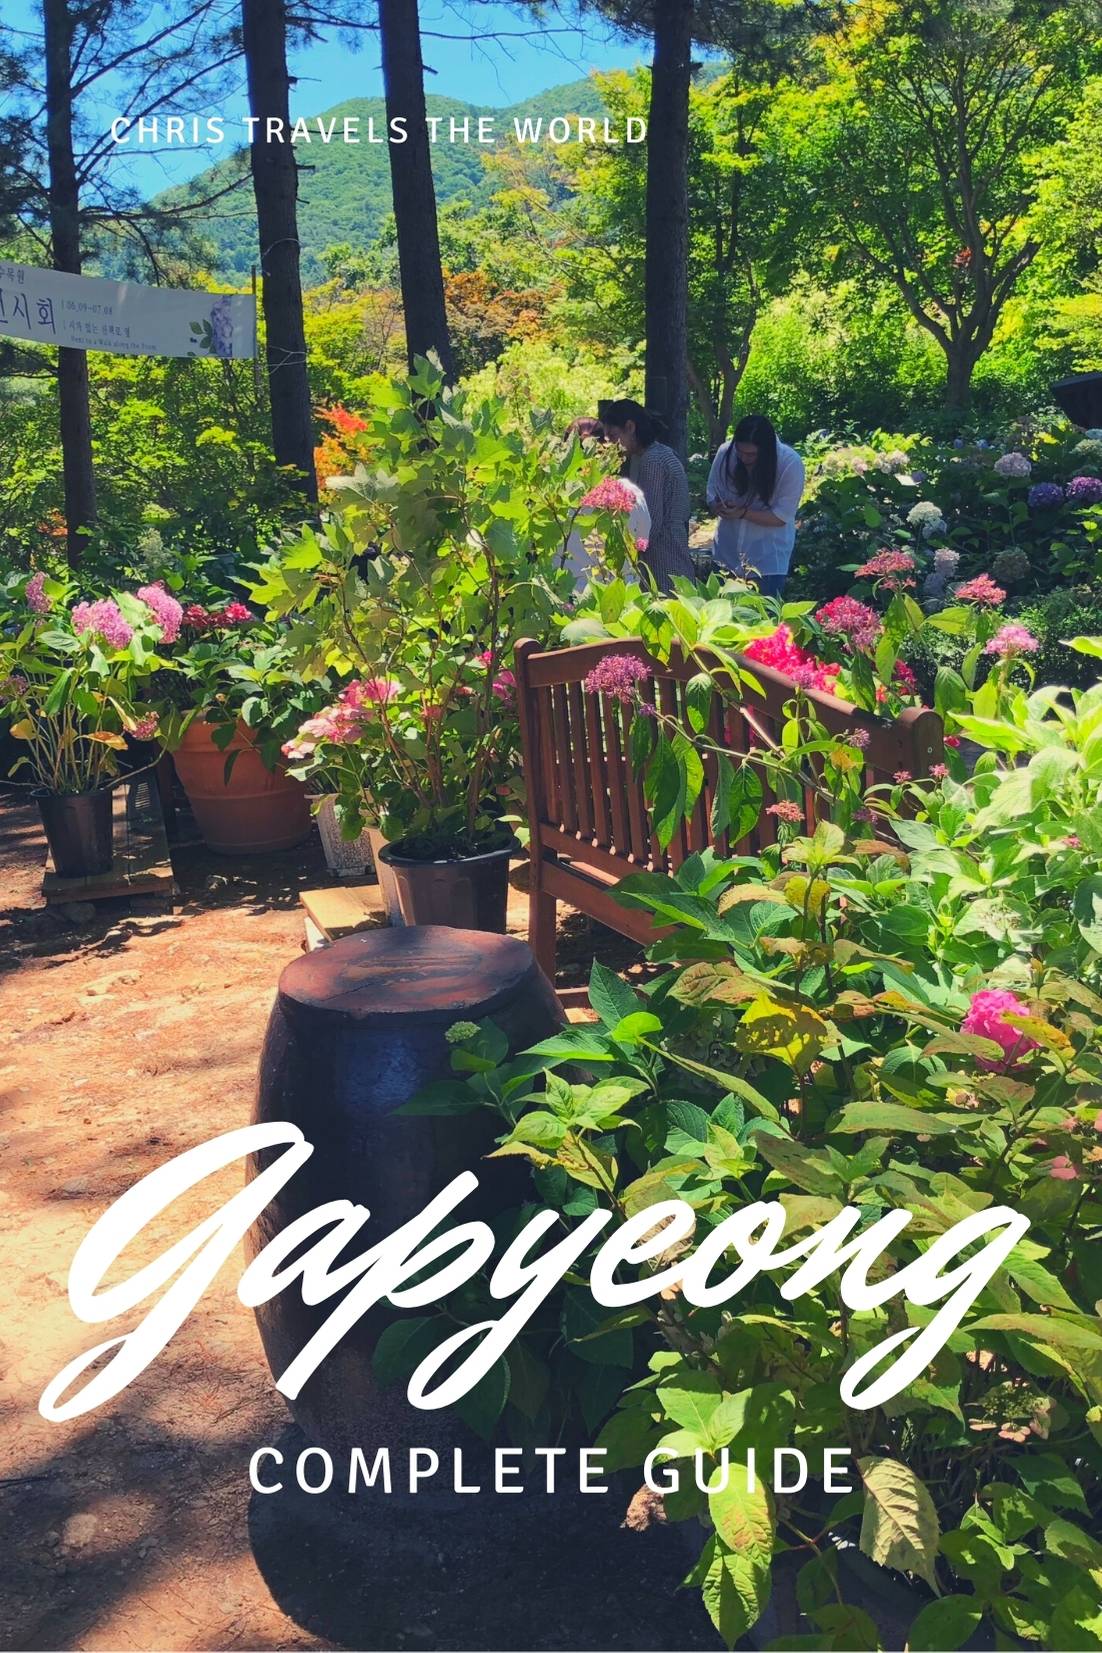 Complete Guide to Gapyeong